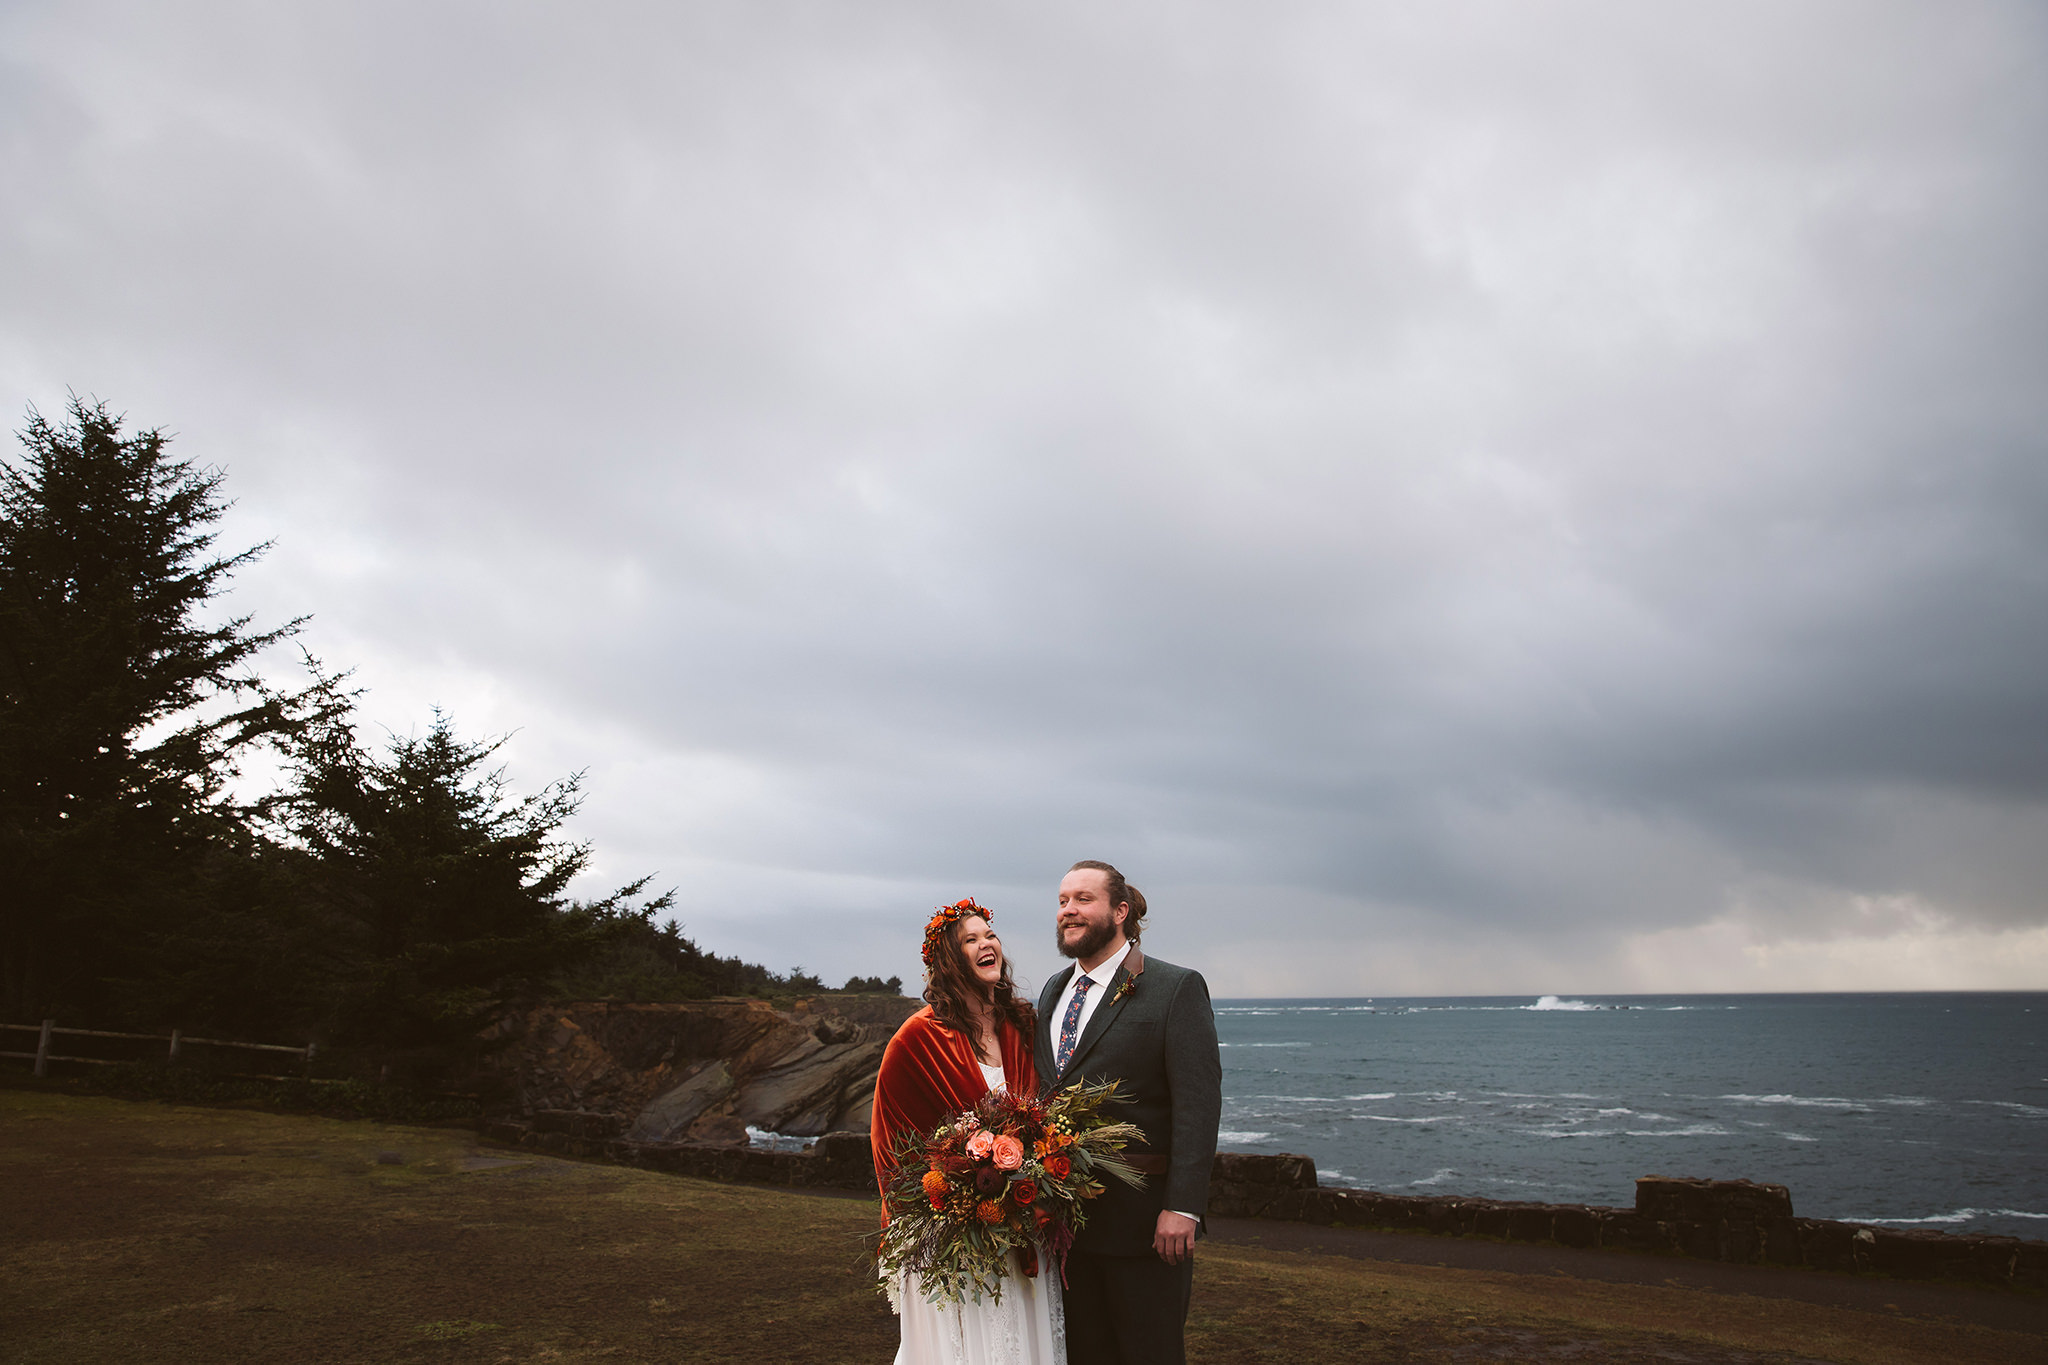 A cinematic wedding photo of a bride and groom with dark cloudy skies and the ocean in the background